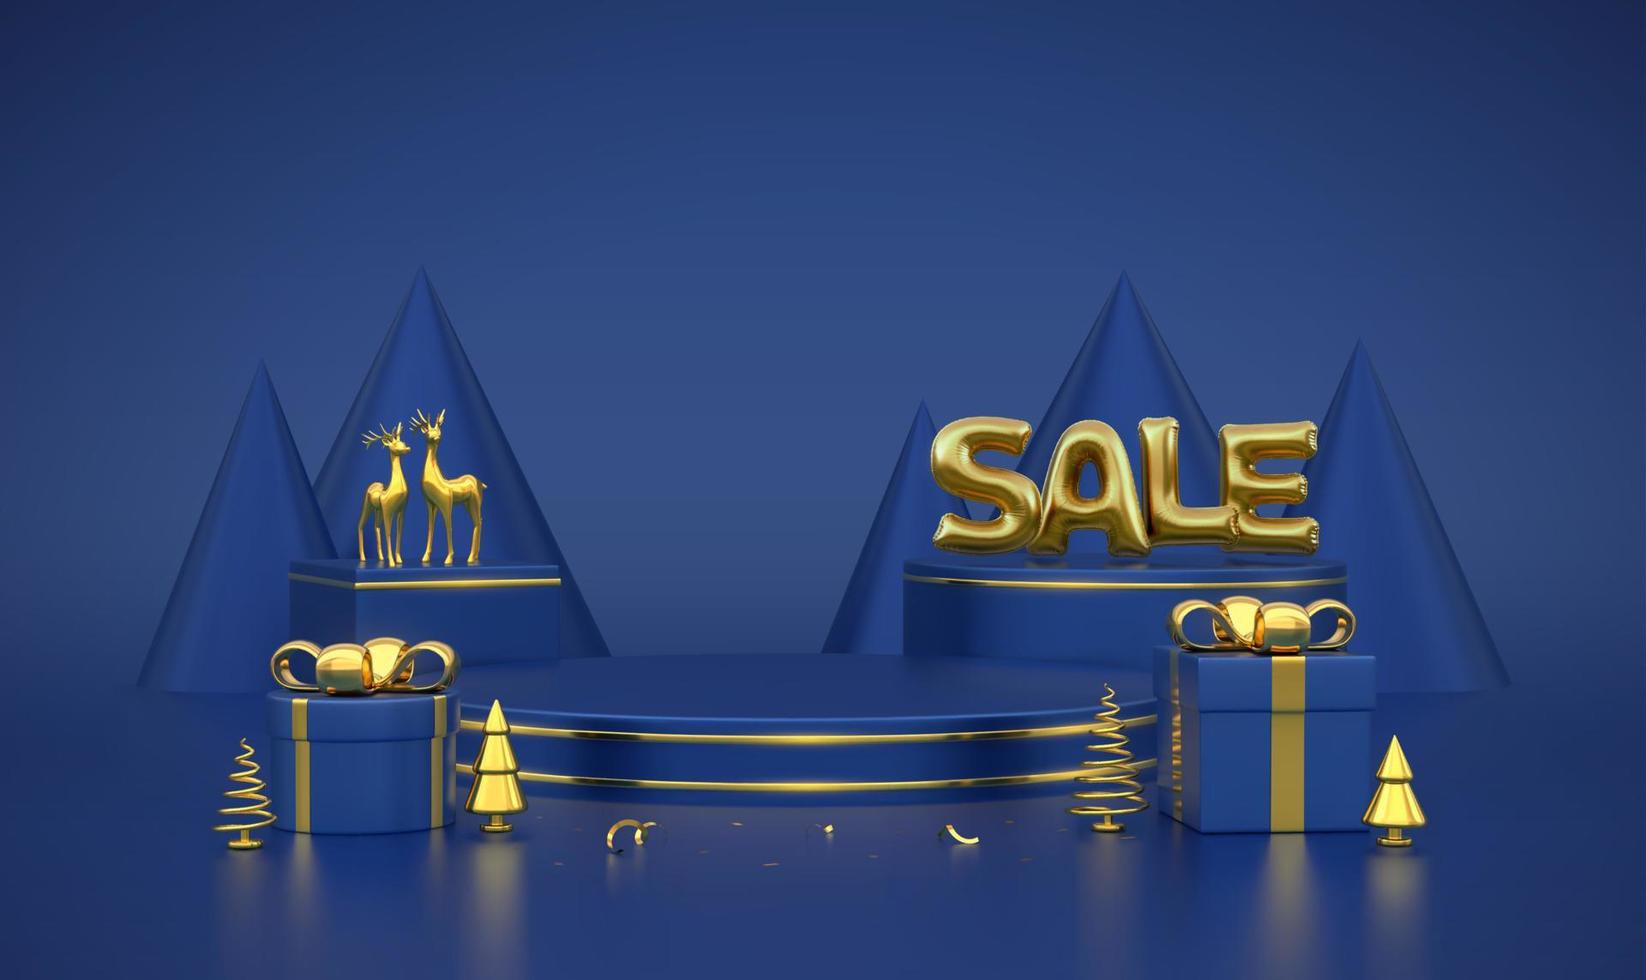 SALE banner. Scene and 3D round platforms on blue background. Golden Sale balloon word. Pedestal with gift boxes with gold bow and golden deers, metallic pine, cone spruce trees. Vector illustration.